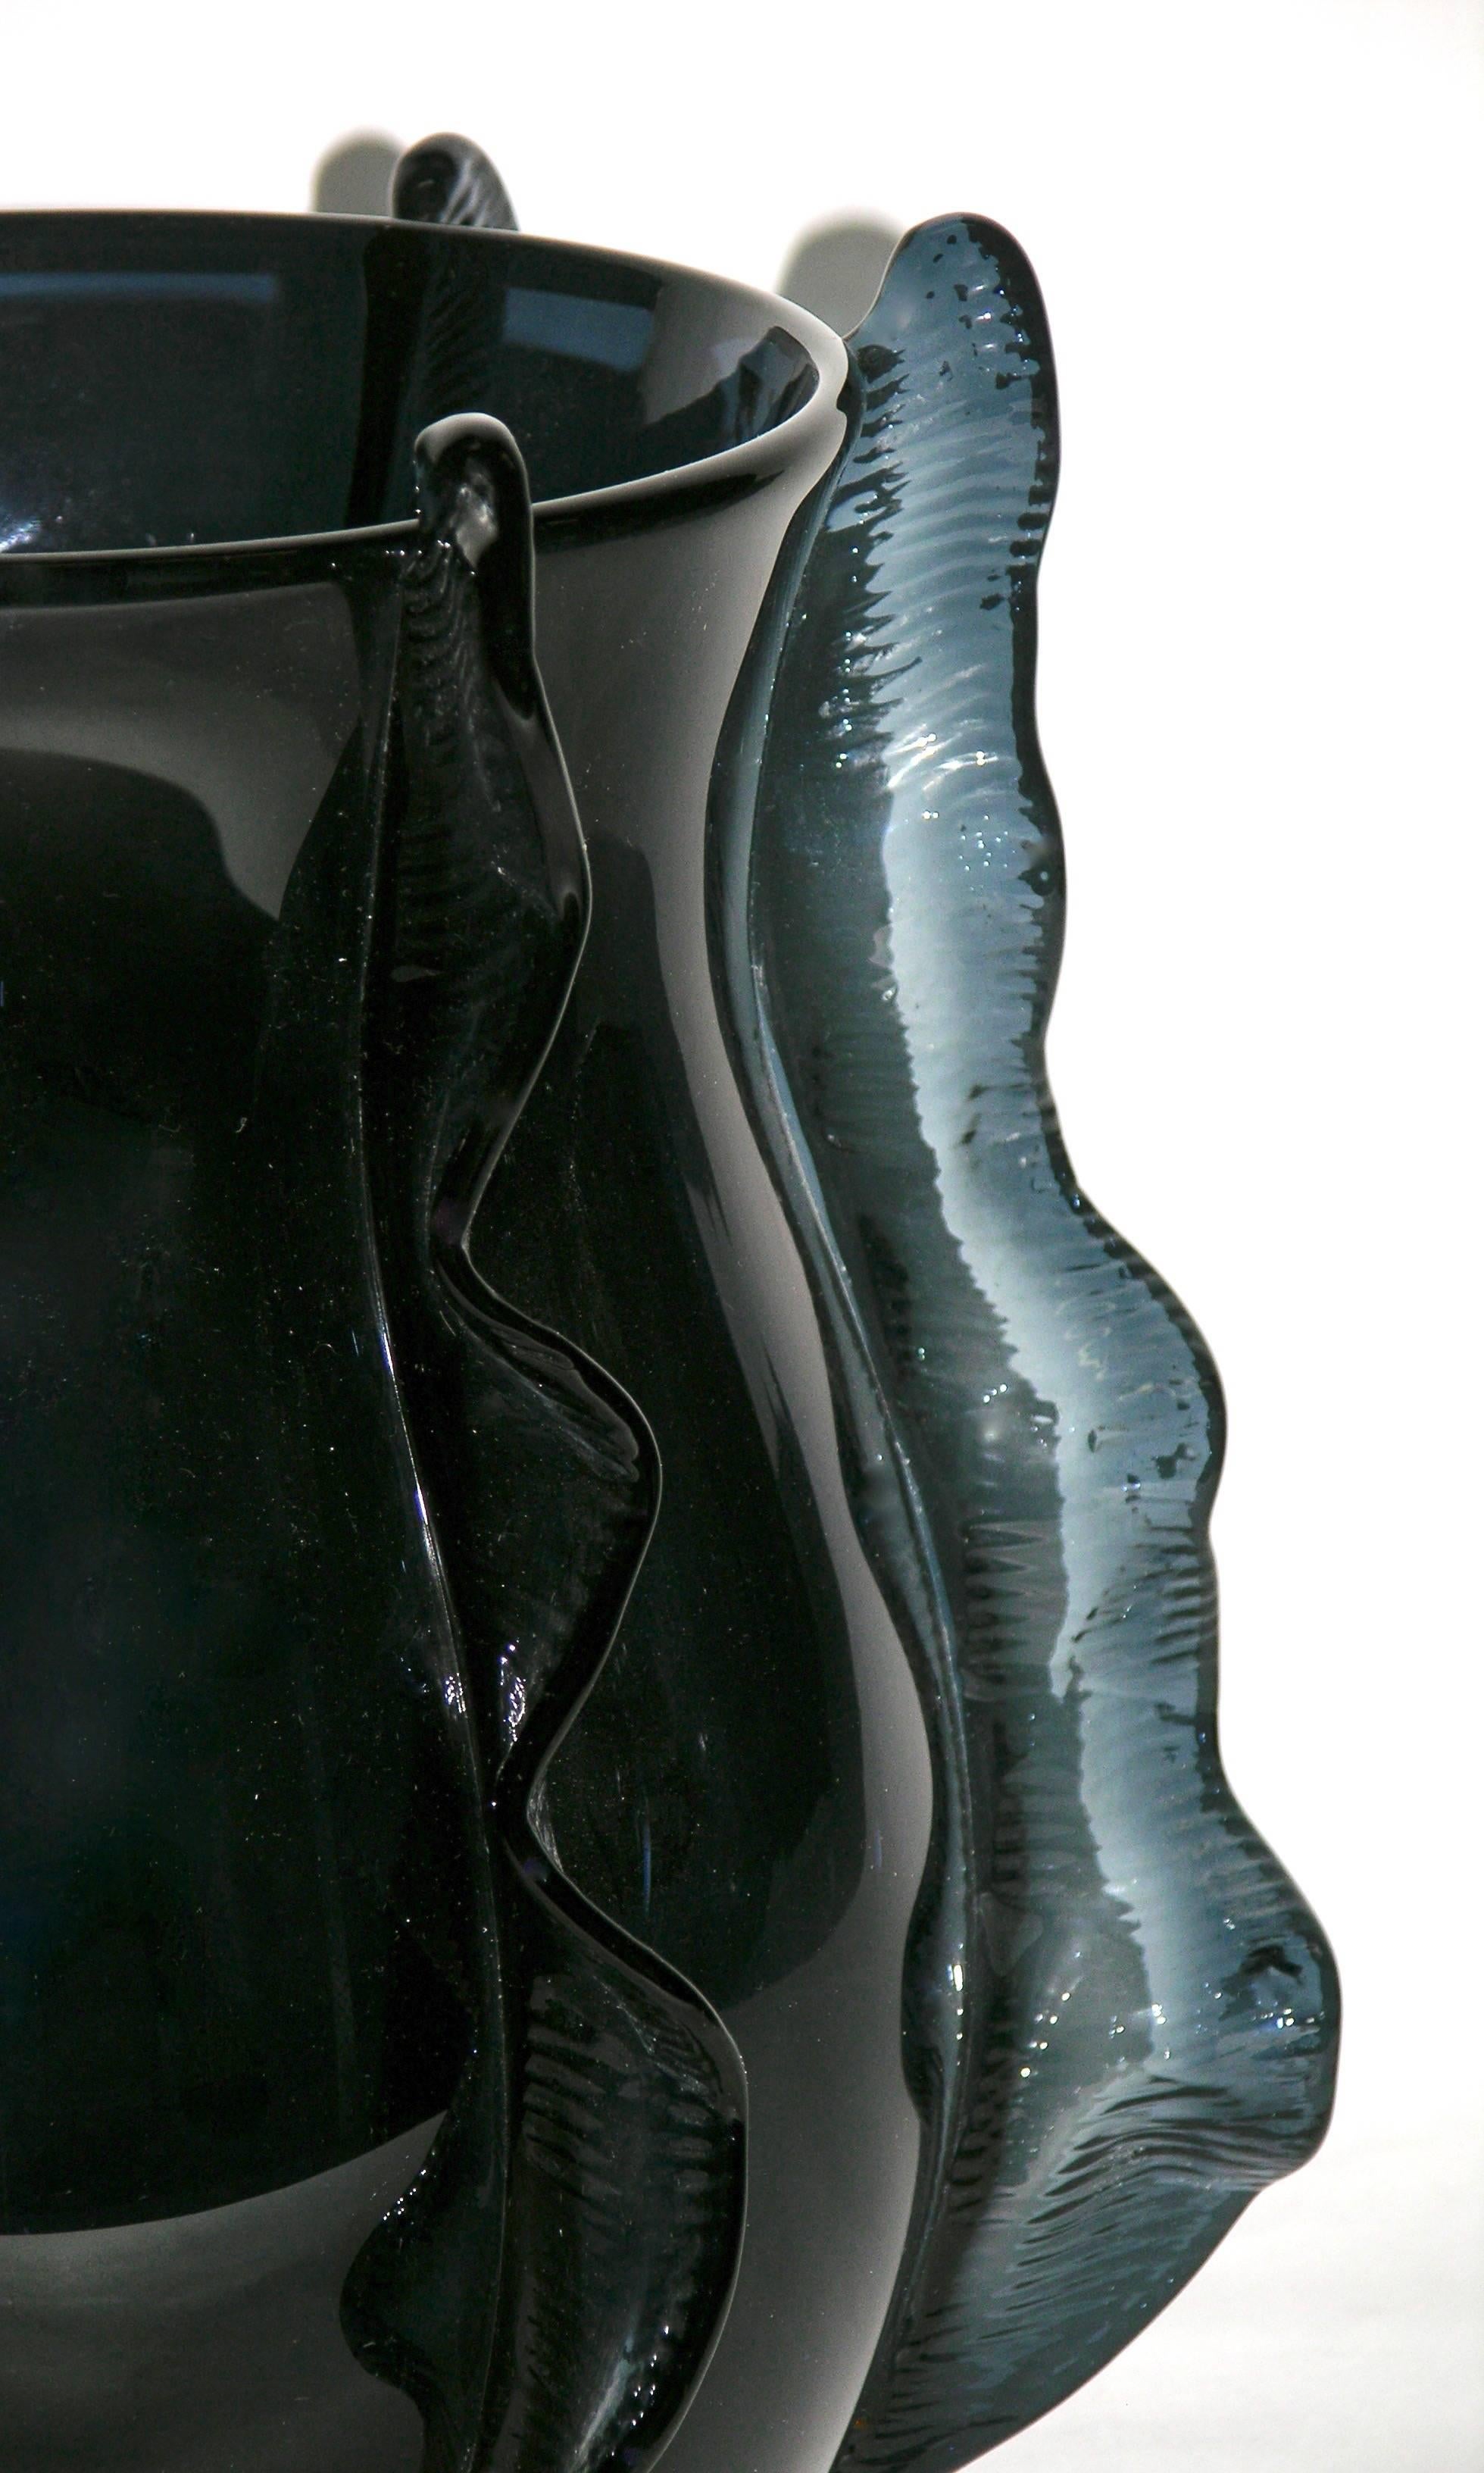 A Venetian pair of organic vases in blown Murano glass, created in a very rare avio blue color, the bombe´ shape sensually enhanced with waved handcrafted incised decorations in relief, like frills in motion that embrace and lift the design. Signed